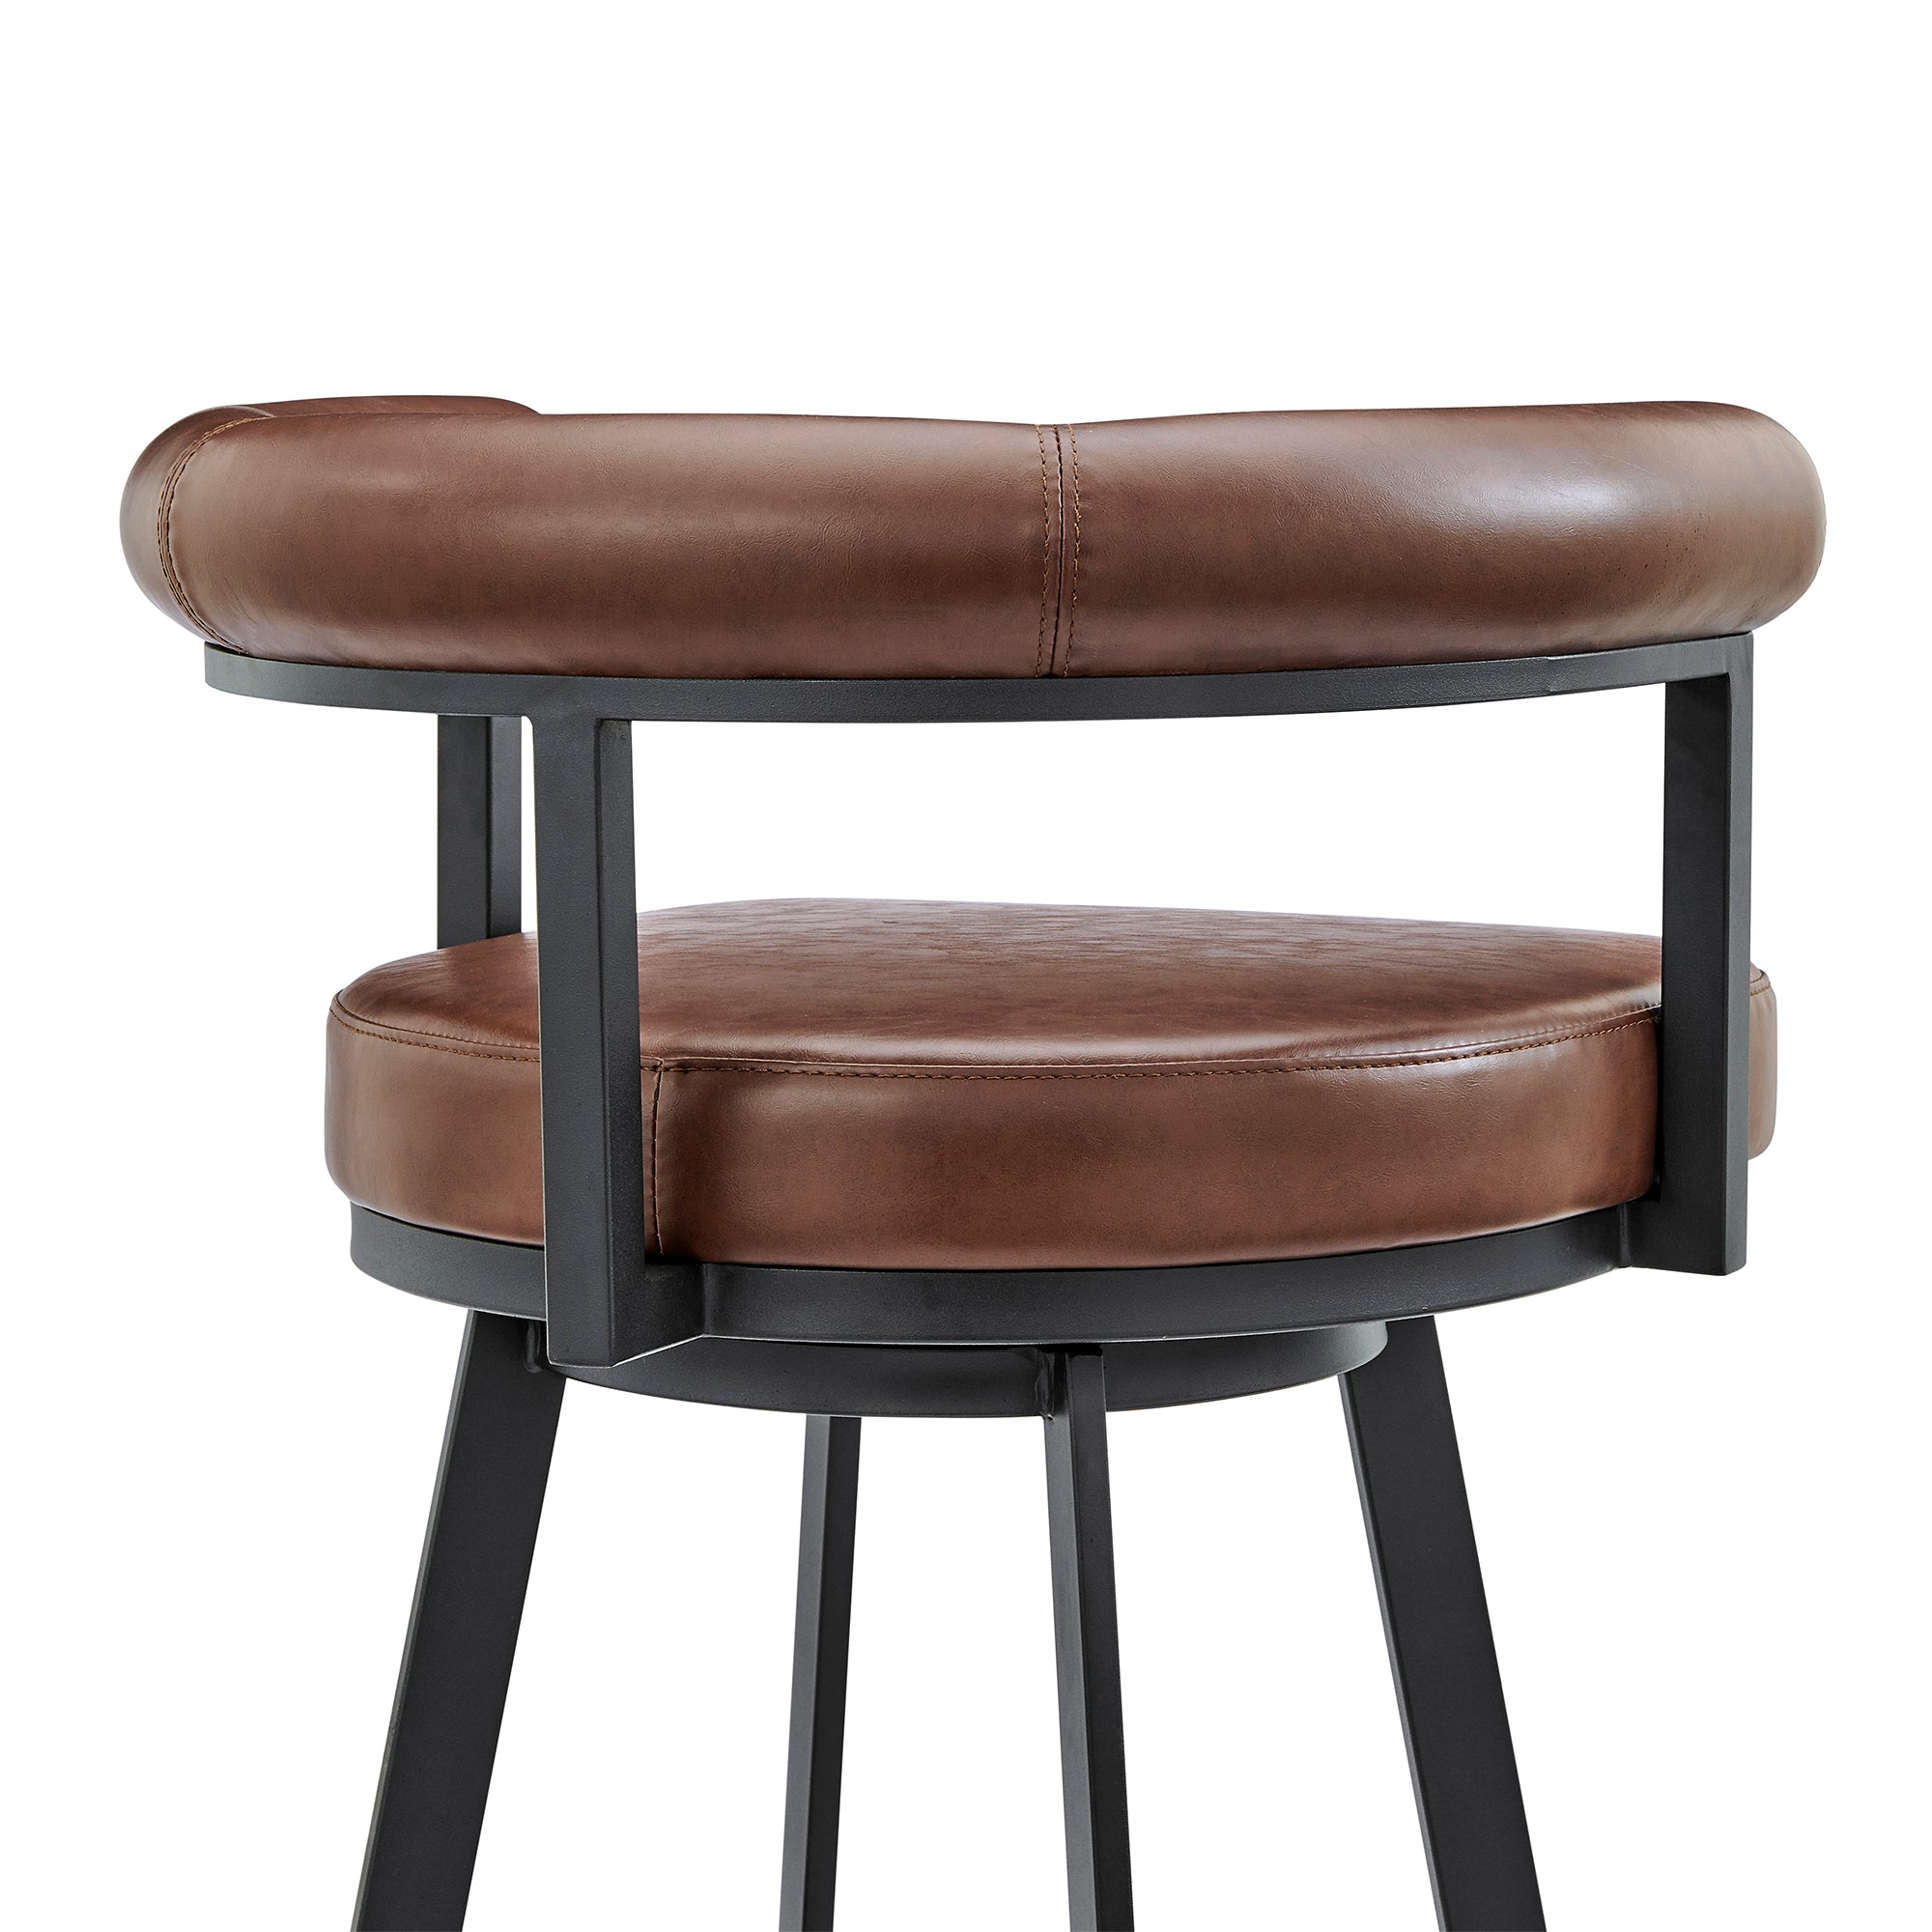 Armen Living - Nolagam Swivel Counter or Bar Stool in Faux Leather and Metal - 840254335639